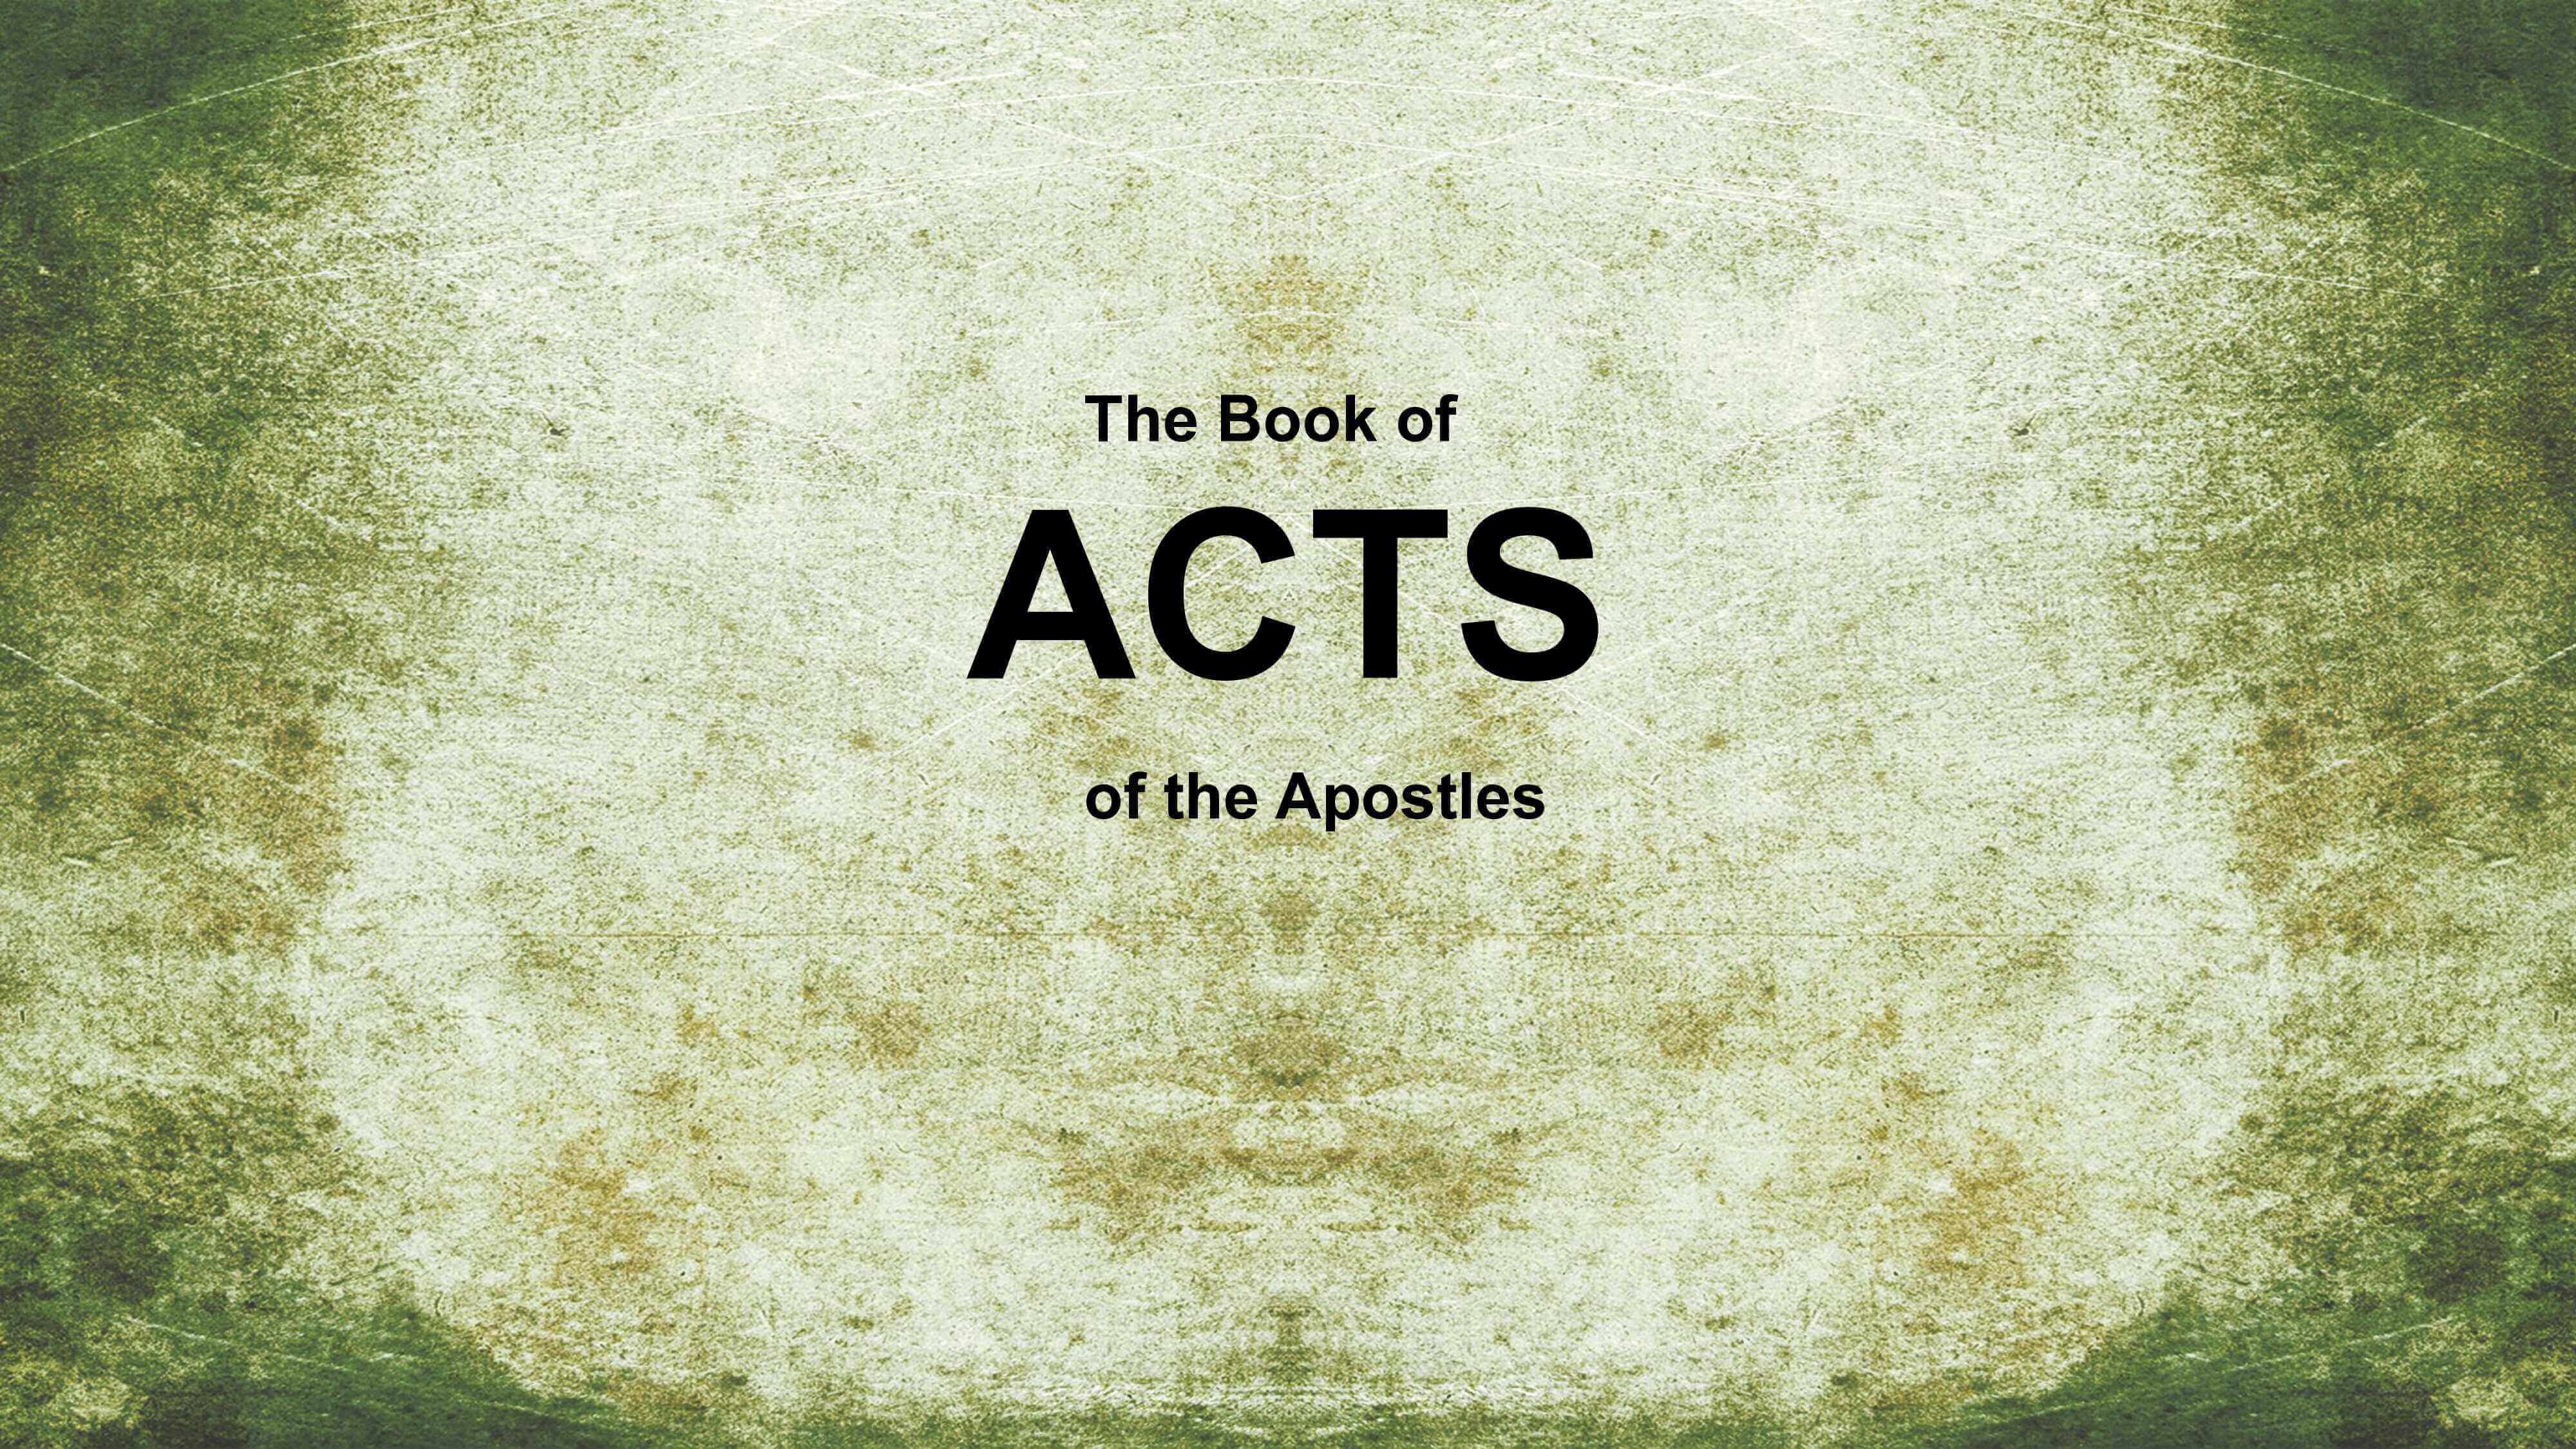 Book of Acts - Lessons 6 and 7 - 7 Appointed, Stephen's Arrest, Defense, and Stoning